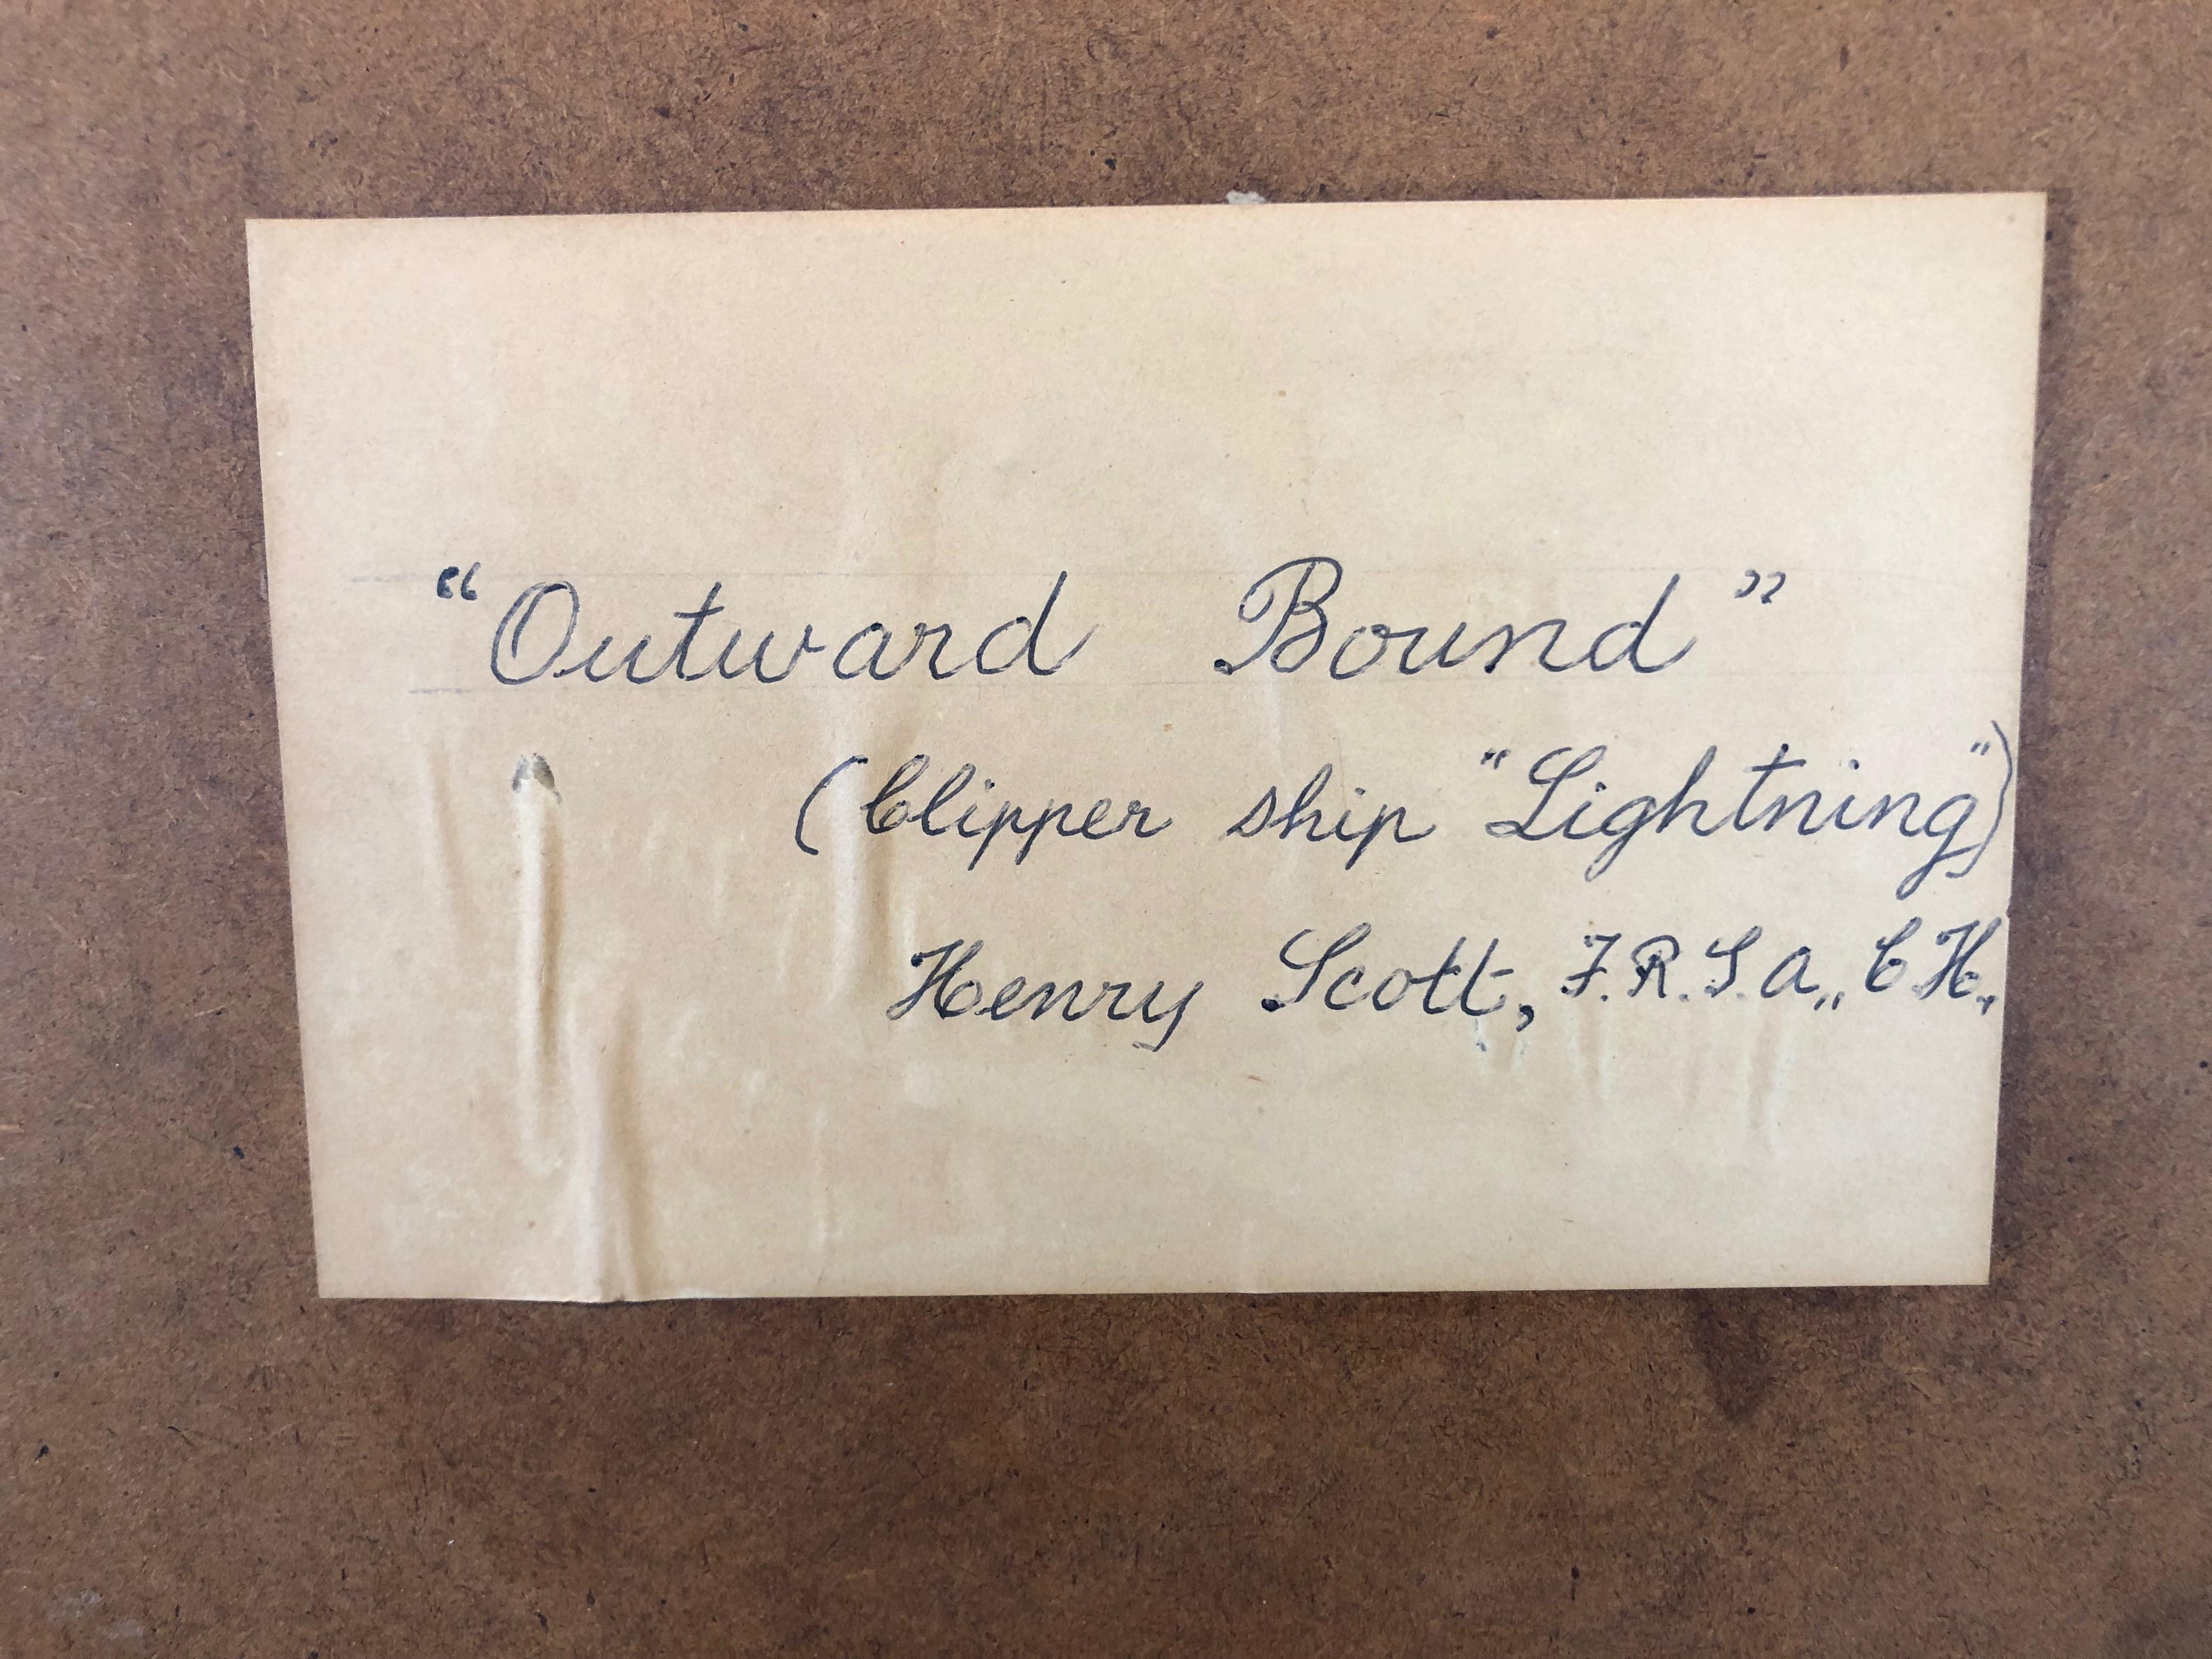 Outward Bound, The Clipper Ship Lightening, Seascape Oil Painting by Henry Scott 3